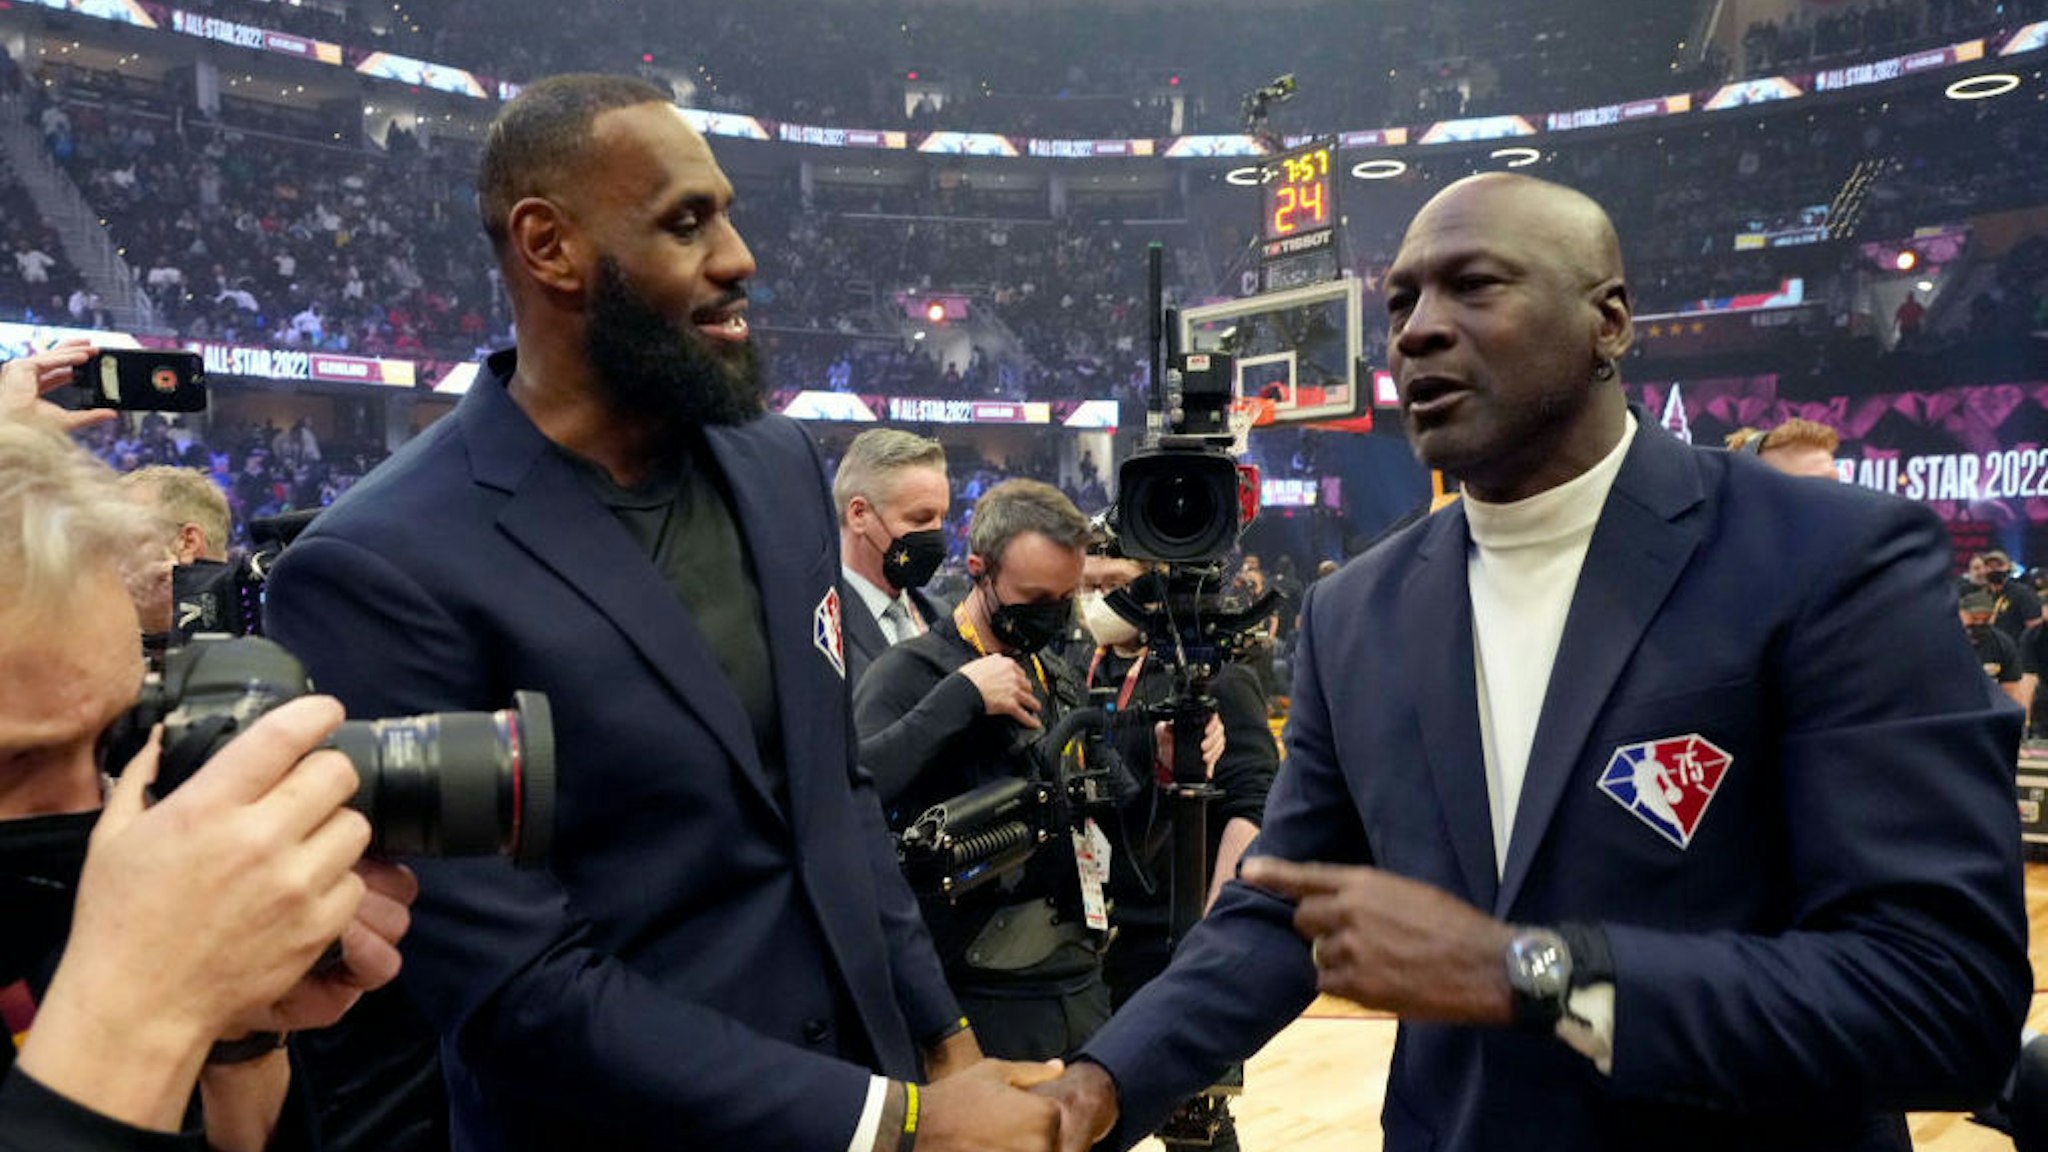 CLEVELAND, OHIO - FEBRUARY 20: (L-R) guest, LeBron James and Michael Jordan attend the 2022 NBA All-Star Game at Rocket Mortgage Fieldhouse on February 20, 2022 in Cleveland, Ohio. NOTE TO USER: User expressly acknowledges and agrees that, by downloading and or using this photograph, User is consenting to the terms and conditions of the Getty Images License Agreement. (Photo by Kevin Mazur/Getty Images)